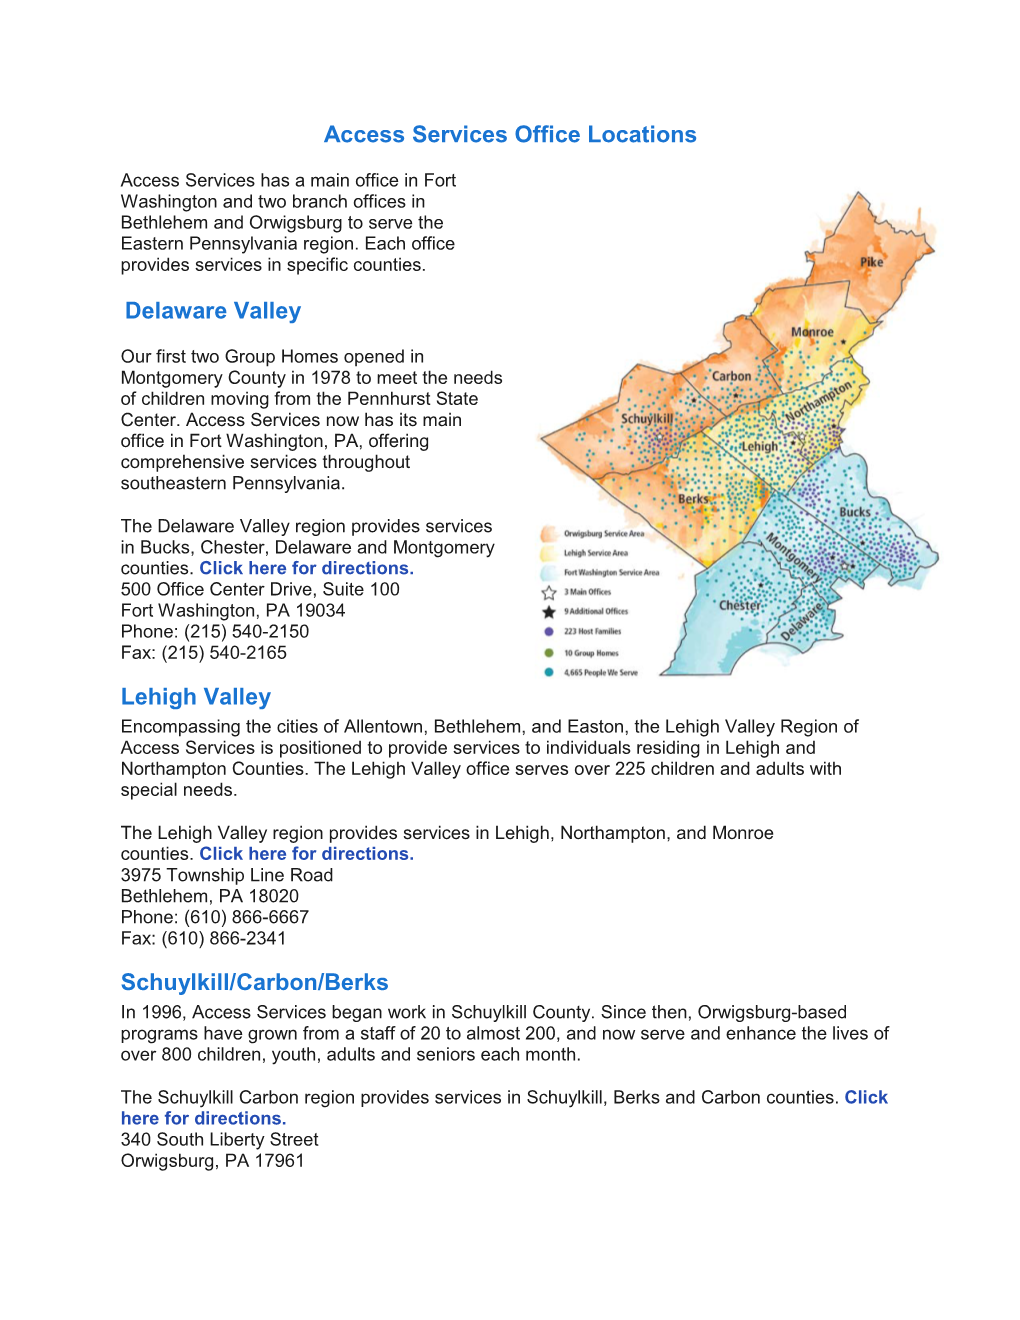 Access Services Office Locations Delaware Valley Lehigh Valley